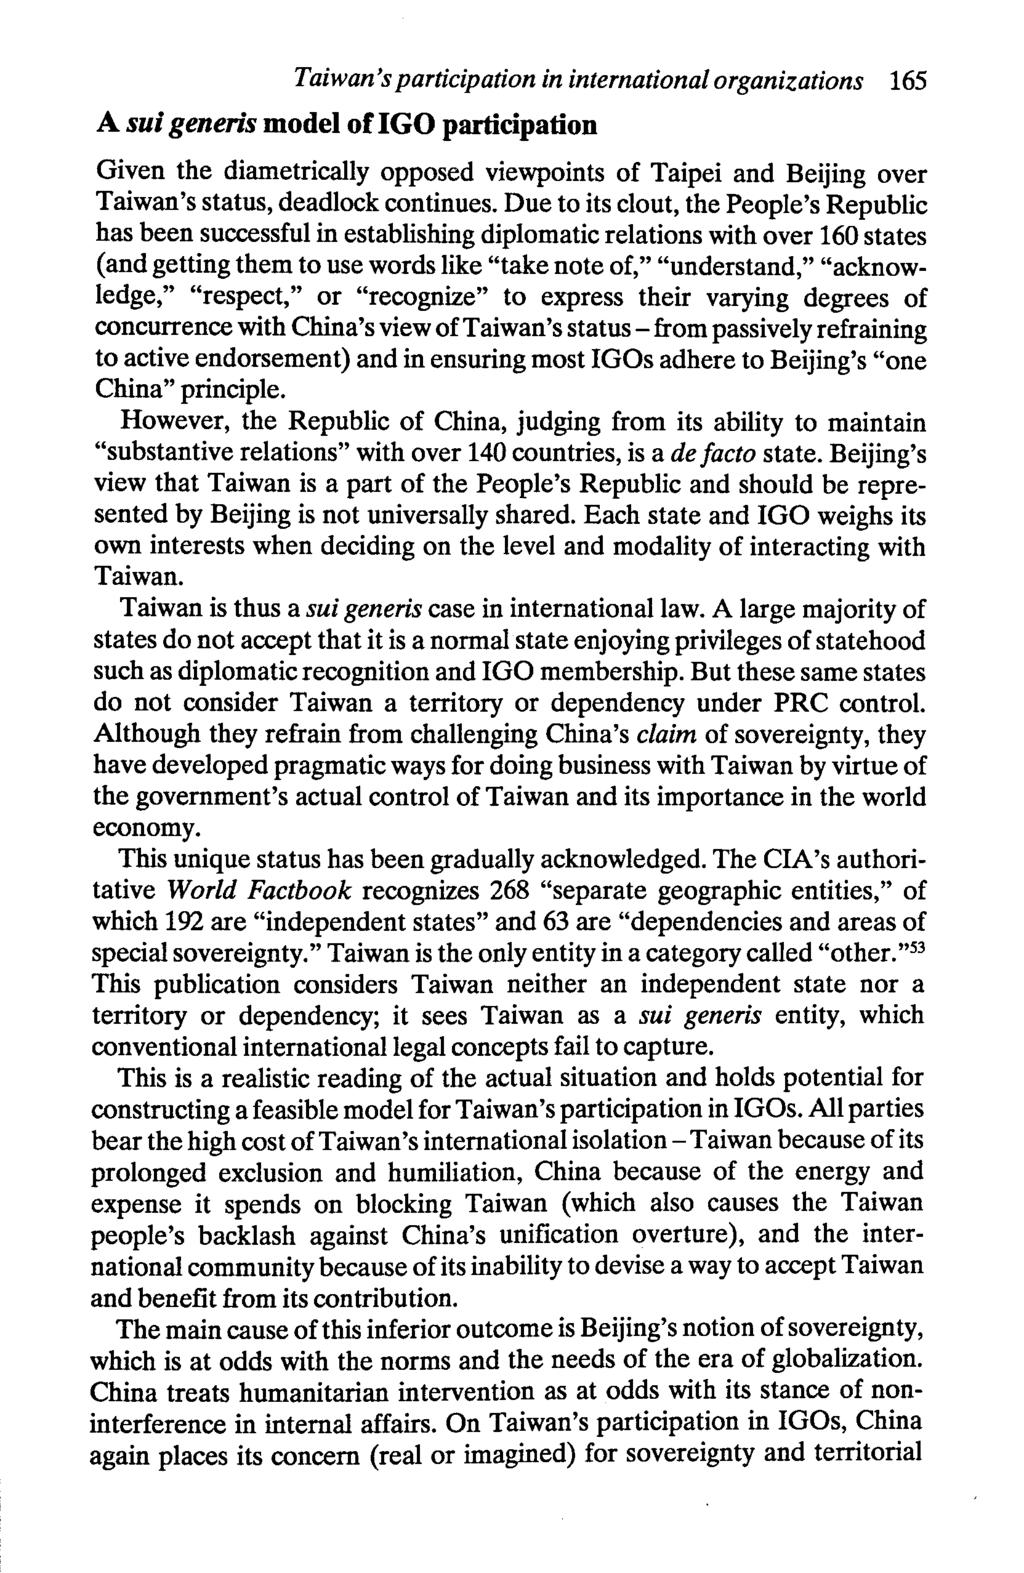 Taiwan's participation in international organizations 165 A sui generis model oflgo participation Given the diametrically opposed viewpoints of Taipei and Beijing over Taiwan's status, deadlock